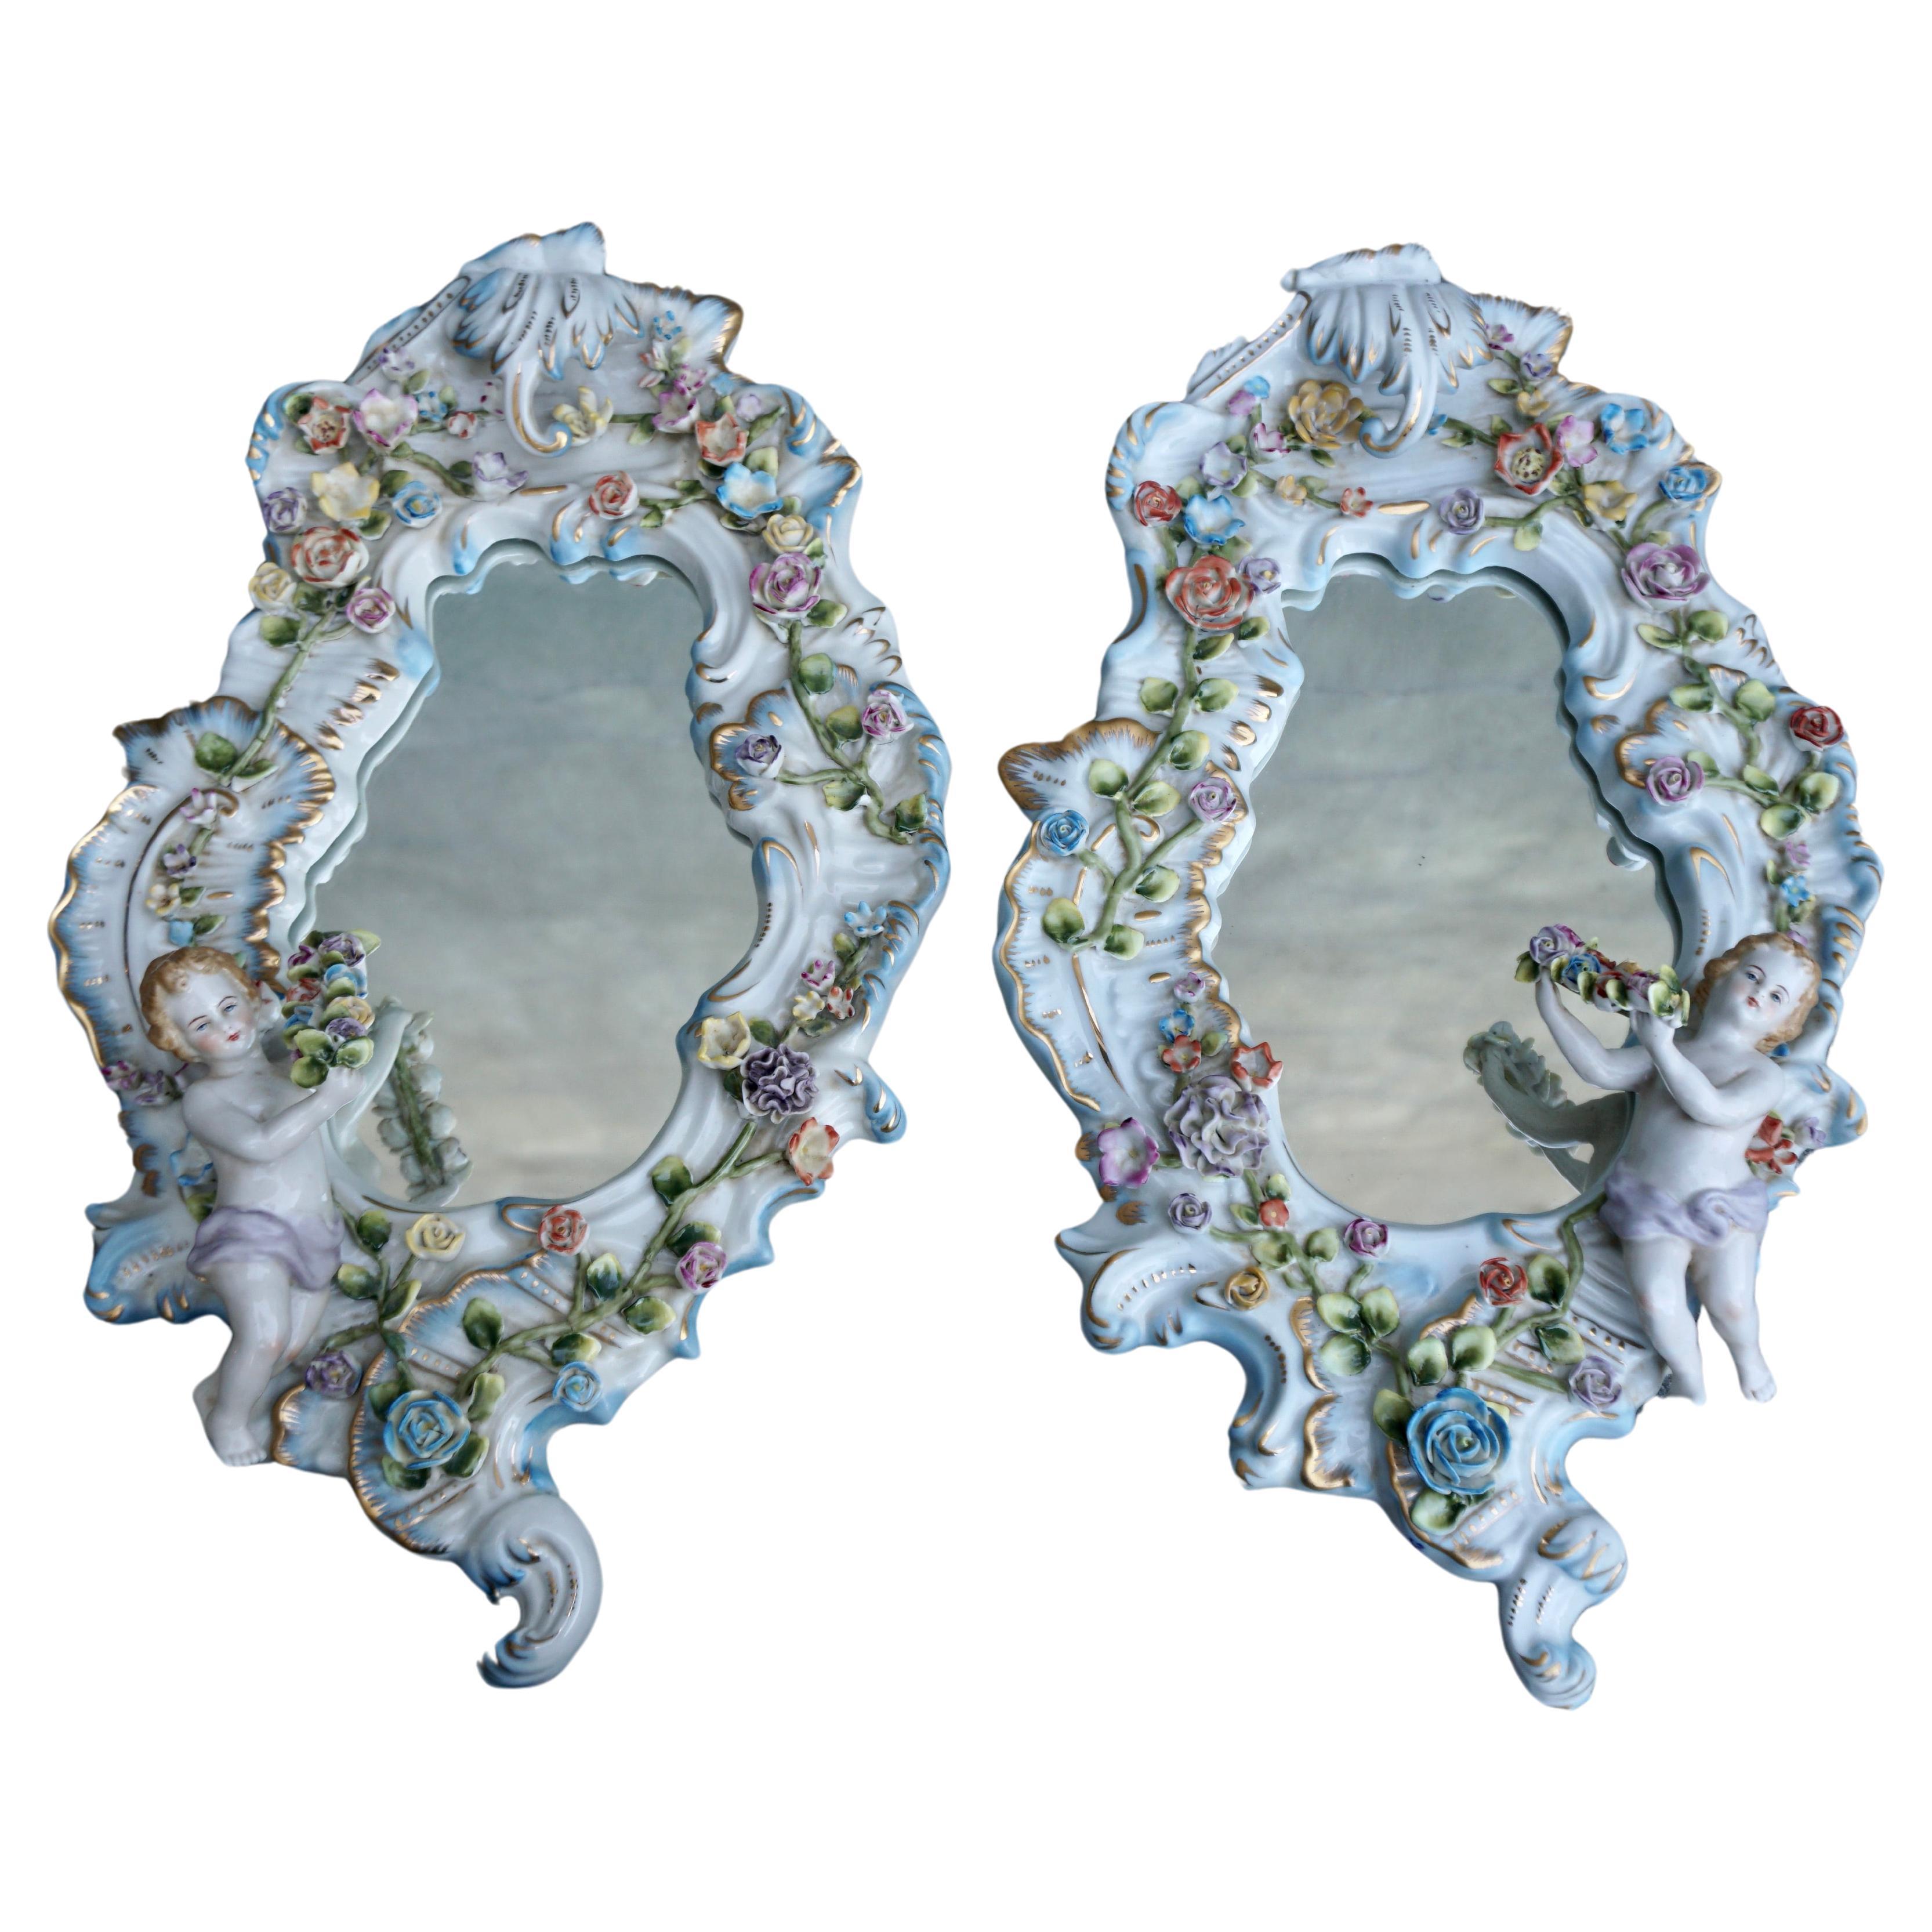 Vintage Capodimonte porcelain framed wall mirror; with gilded accents,and elaborately decorated with a variety of delicately crafted flowers and cherub perched on the corners.

There can be some small leaves missing given the period of dating and